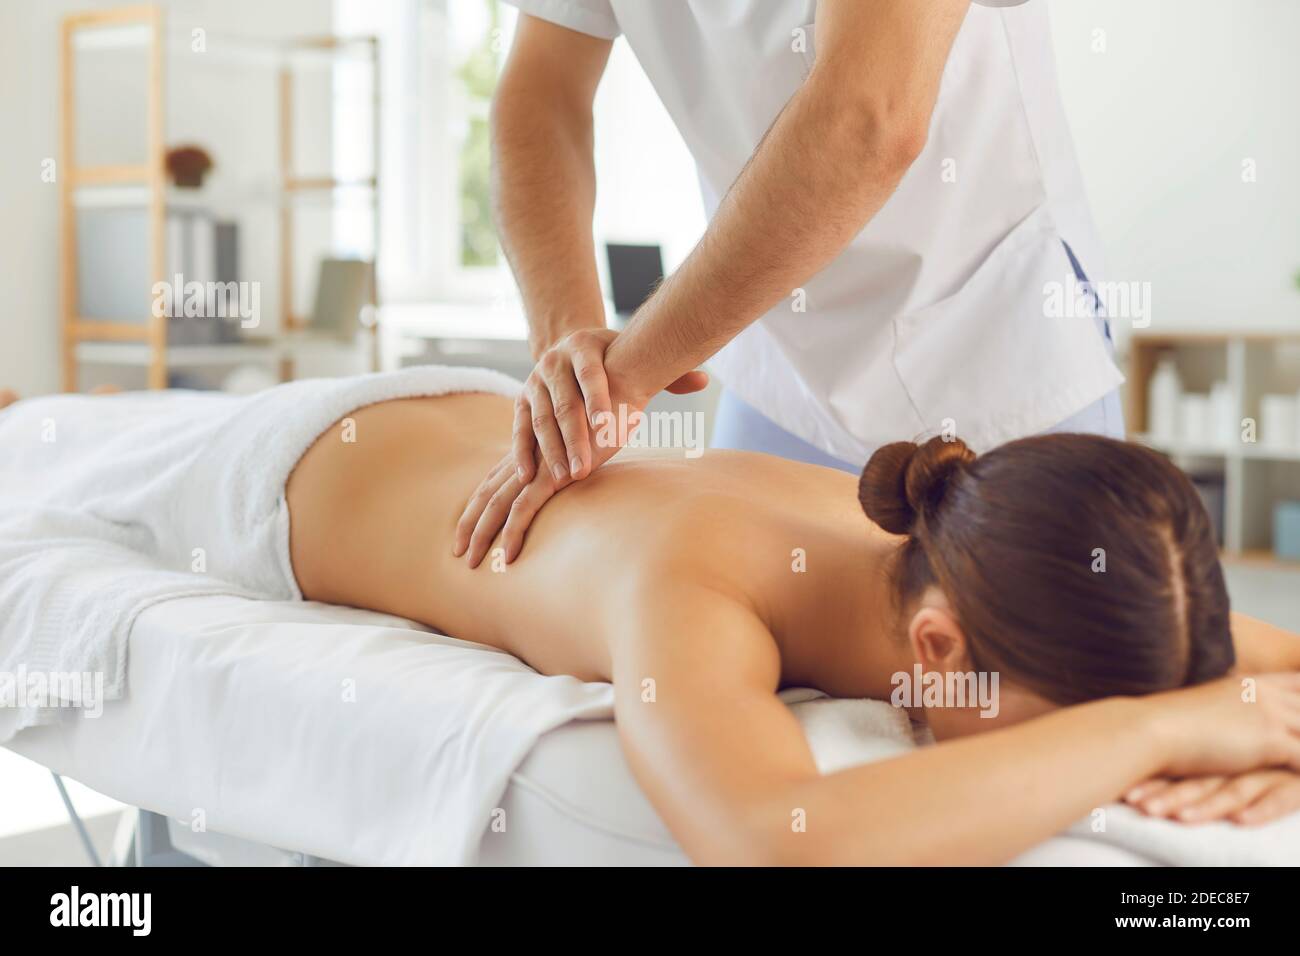 Lying woman patient getting massage of back from professional chiropractor or masseur Stock Photo